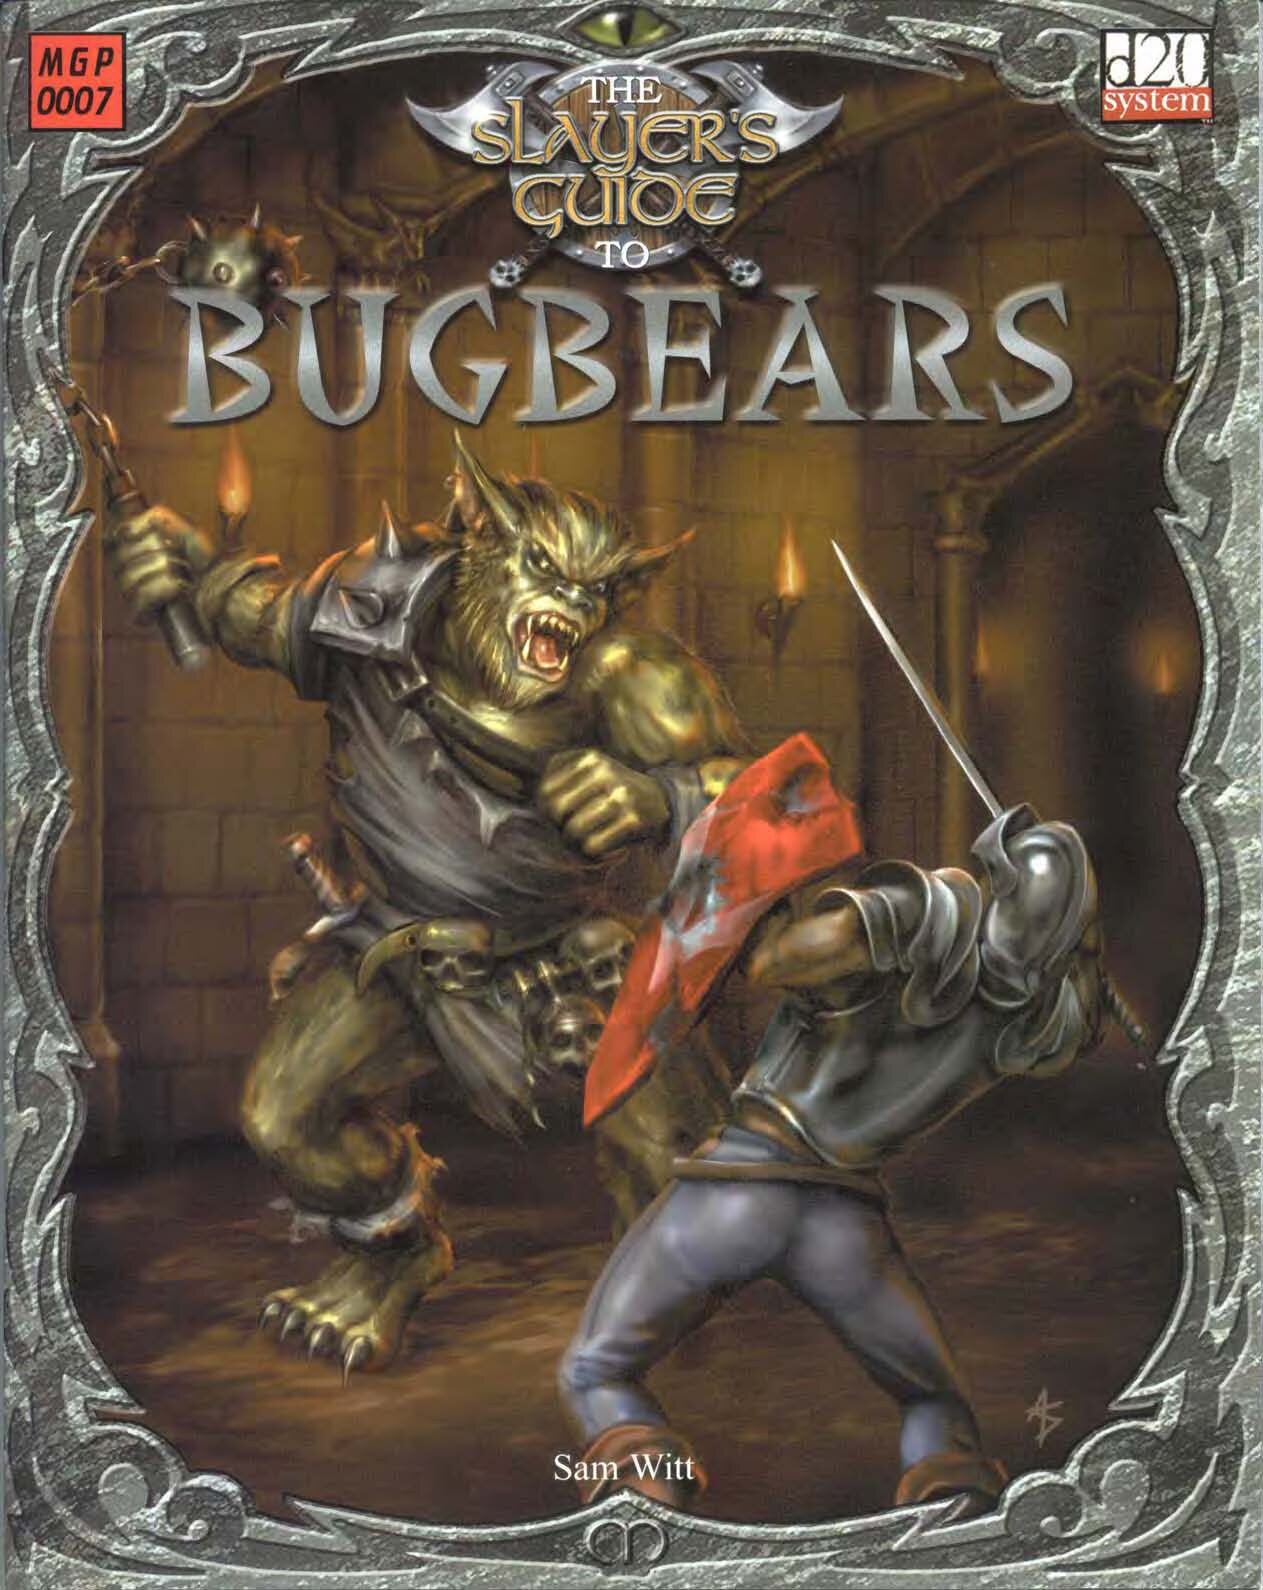 The Slayer's Guide to Bugbears